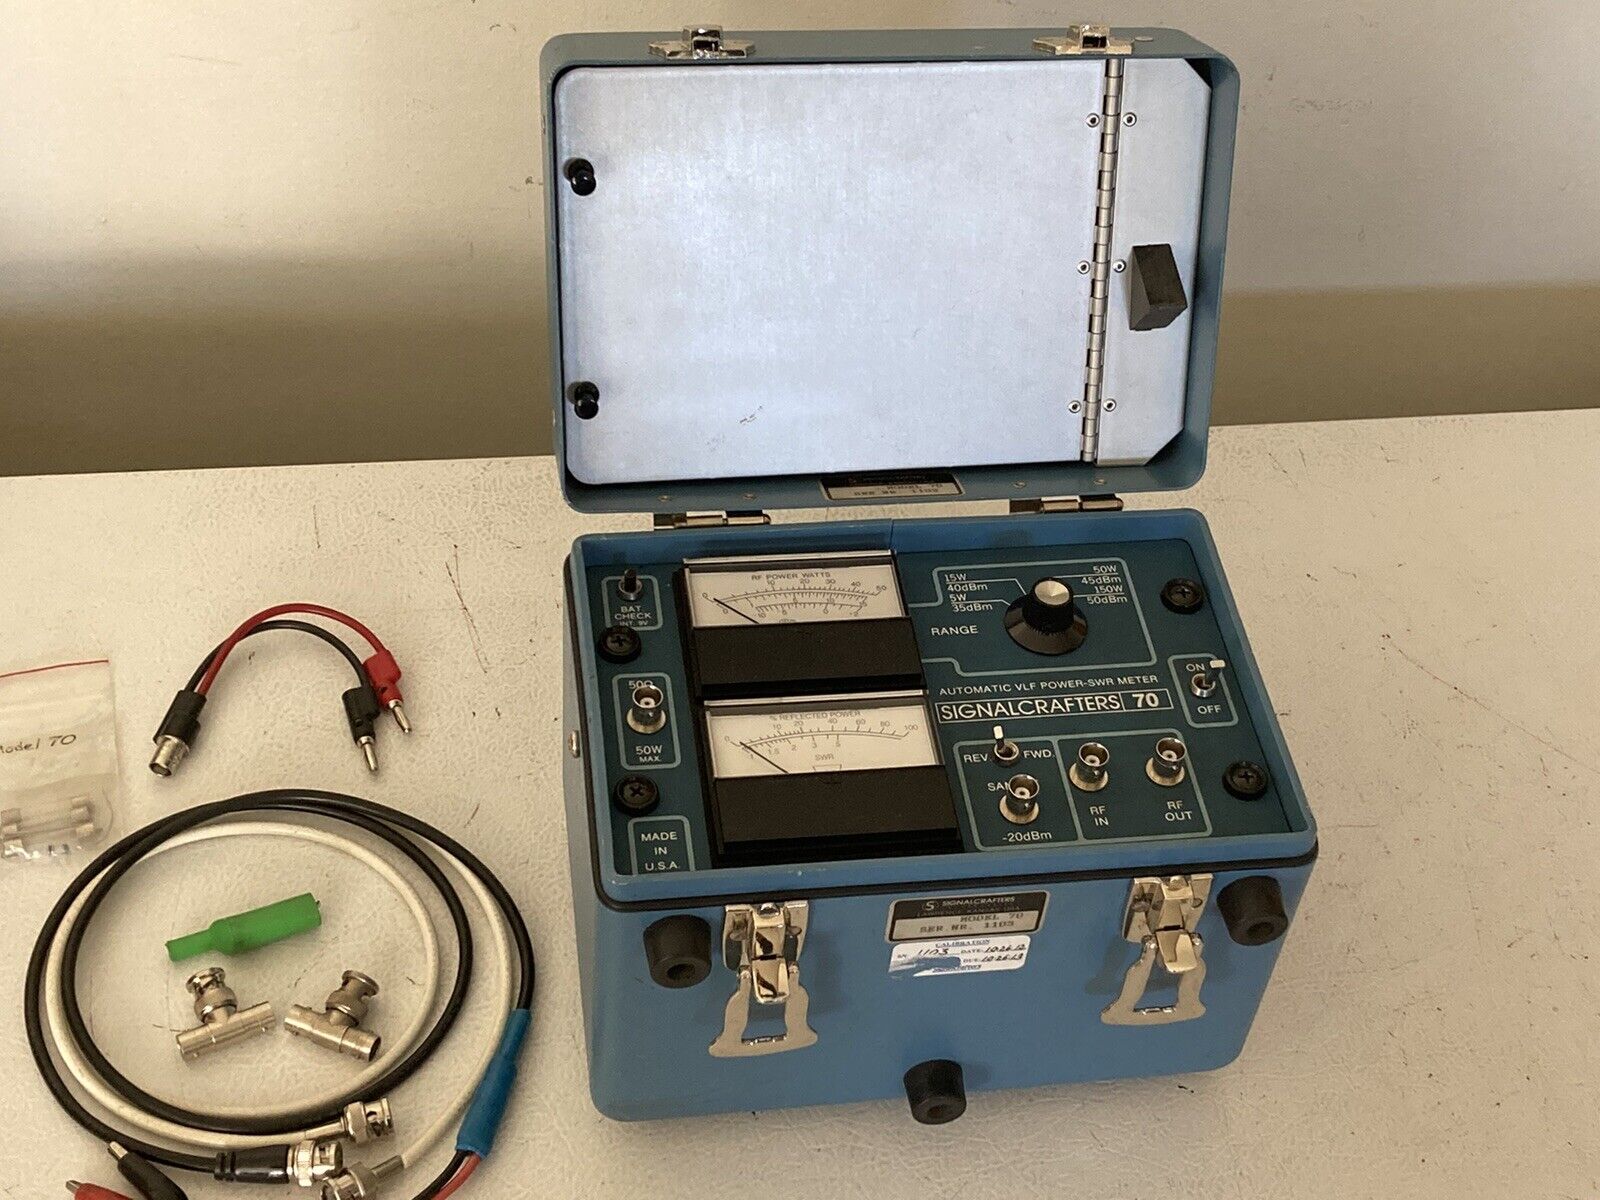 Signalcrafters Model 70 Automatic VLF Power SWR Meter Needs Repair